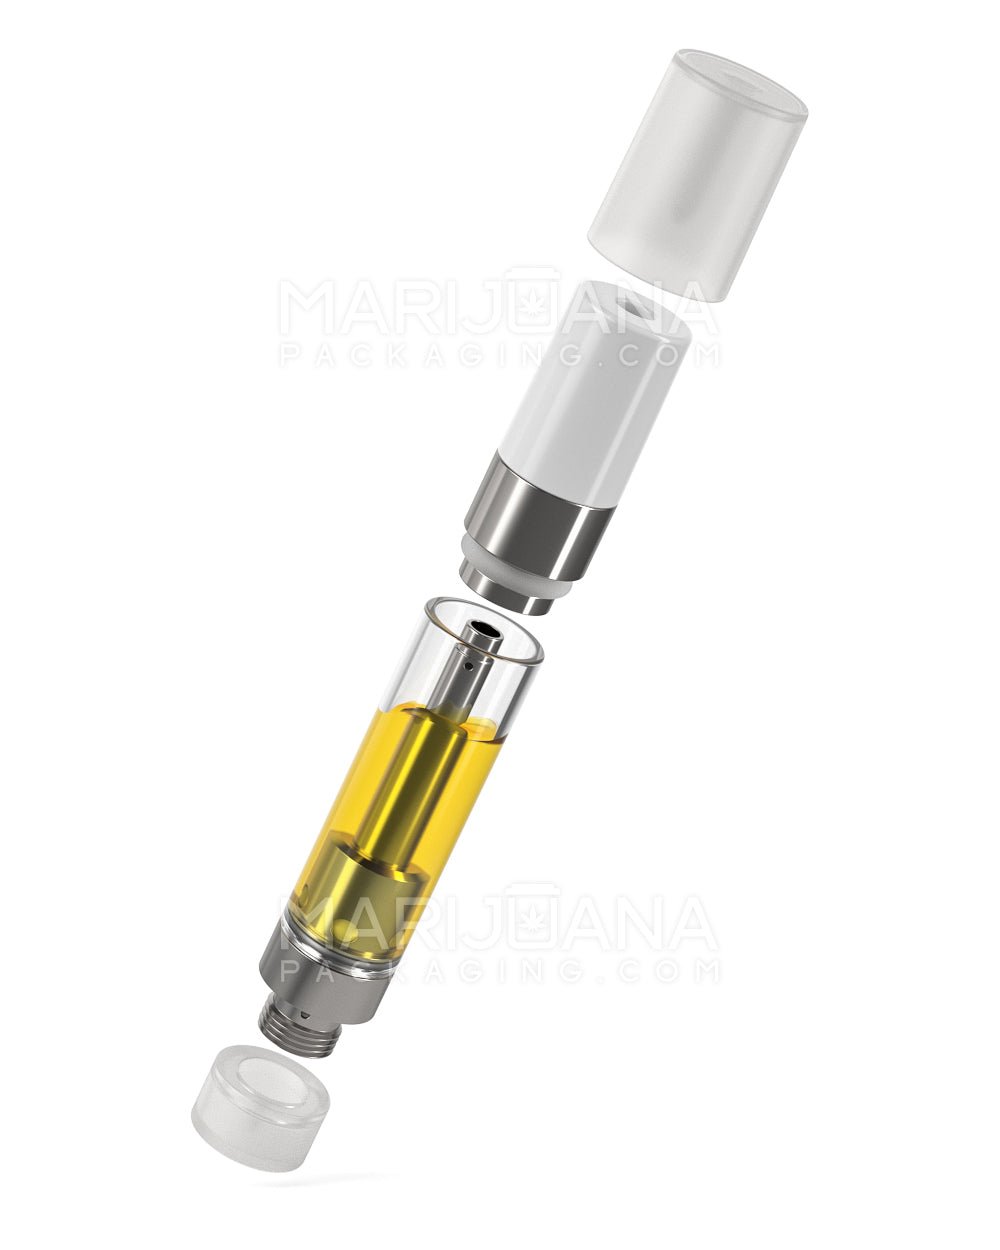 Ceramic Core Glass Vape Cartridge with Round White Plastic Mouthpiece | 1mL - Press On - 1200 Count - 8